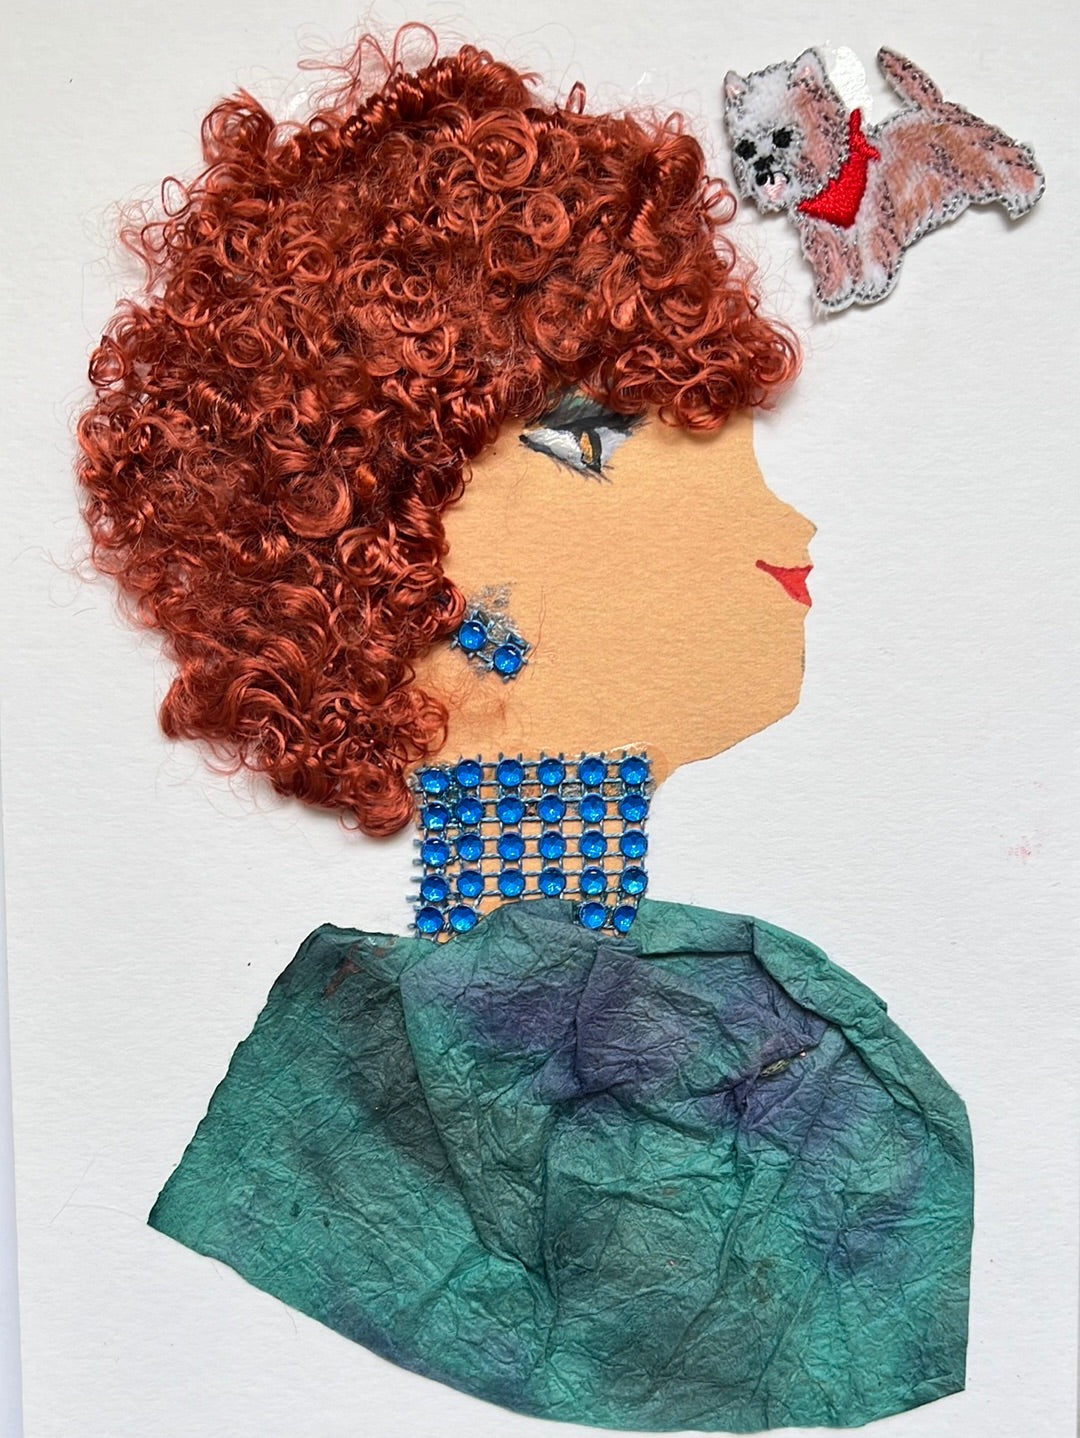 This card has been given the name Bea. Bea wears a blouse which has different tones of blue blended together, and brighter blue gem jewellery. Her hair is red and curly, and it is short. In the top left, there is a small dog with white and ginger fur, and it is wearing a red bandana. 